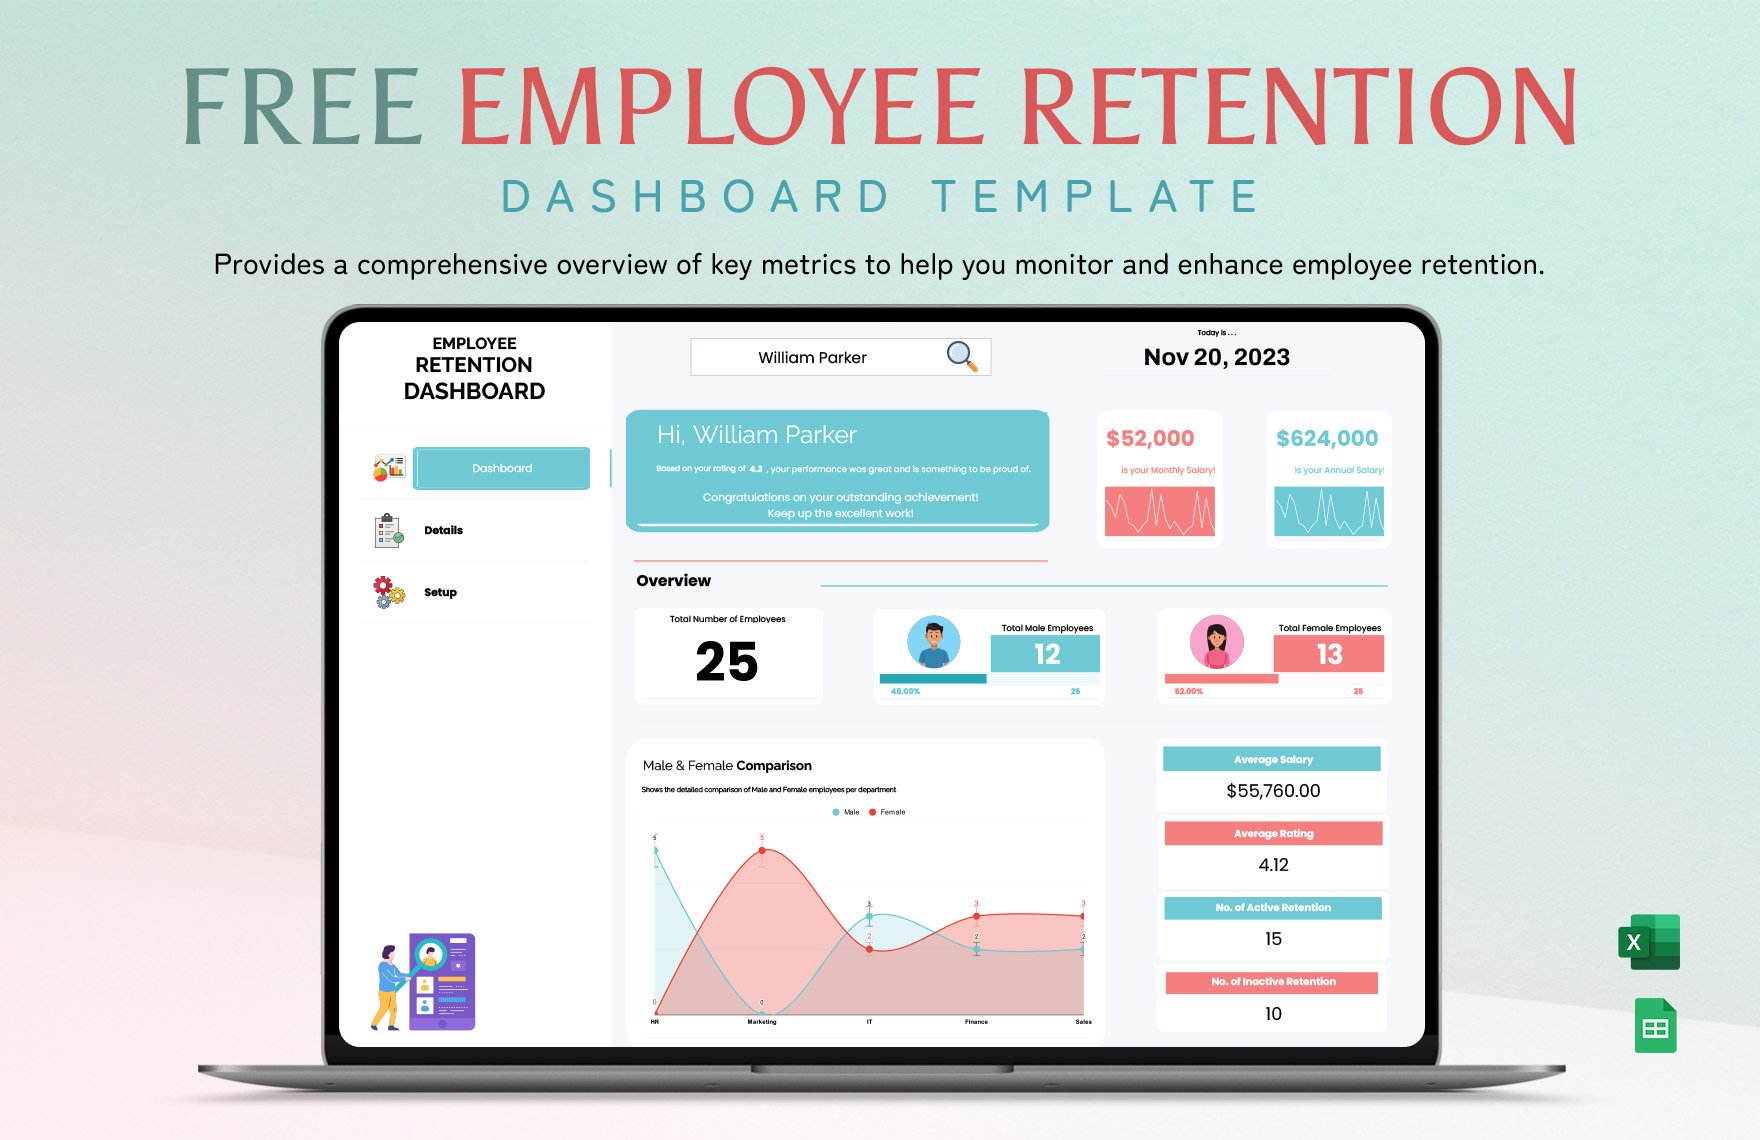 Free Employee Retention Dashboard Template in Excel, Google Sheets